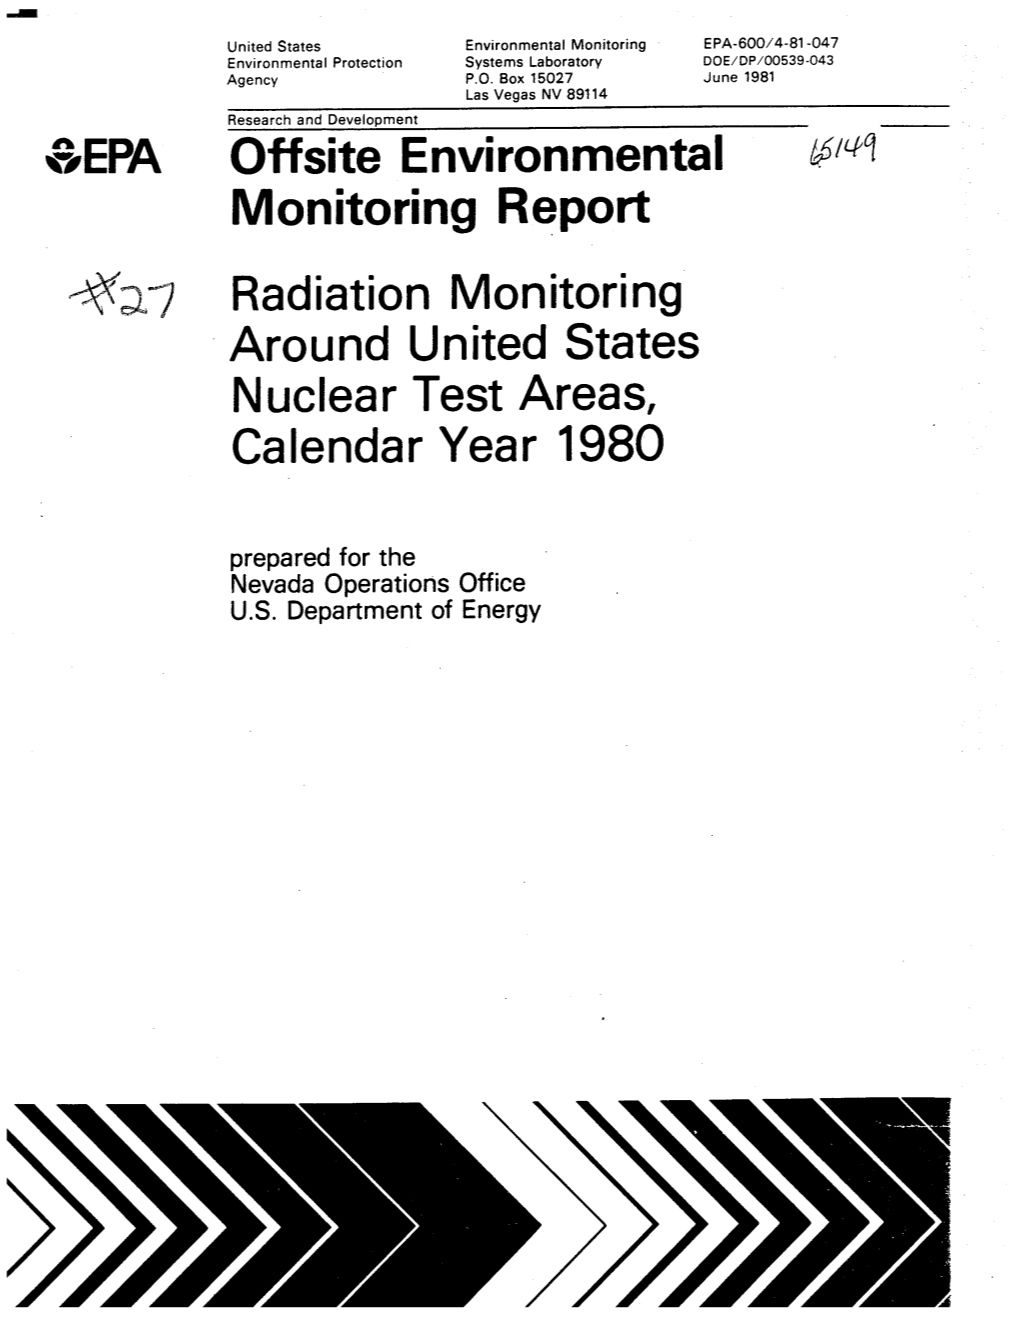 Radiation Monitoring Around United States Nuclear Test Areas, Calendar Year 1980 Prepared for the Nevada Operations Office U.S